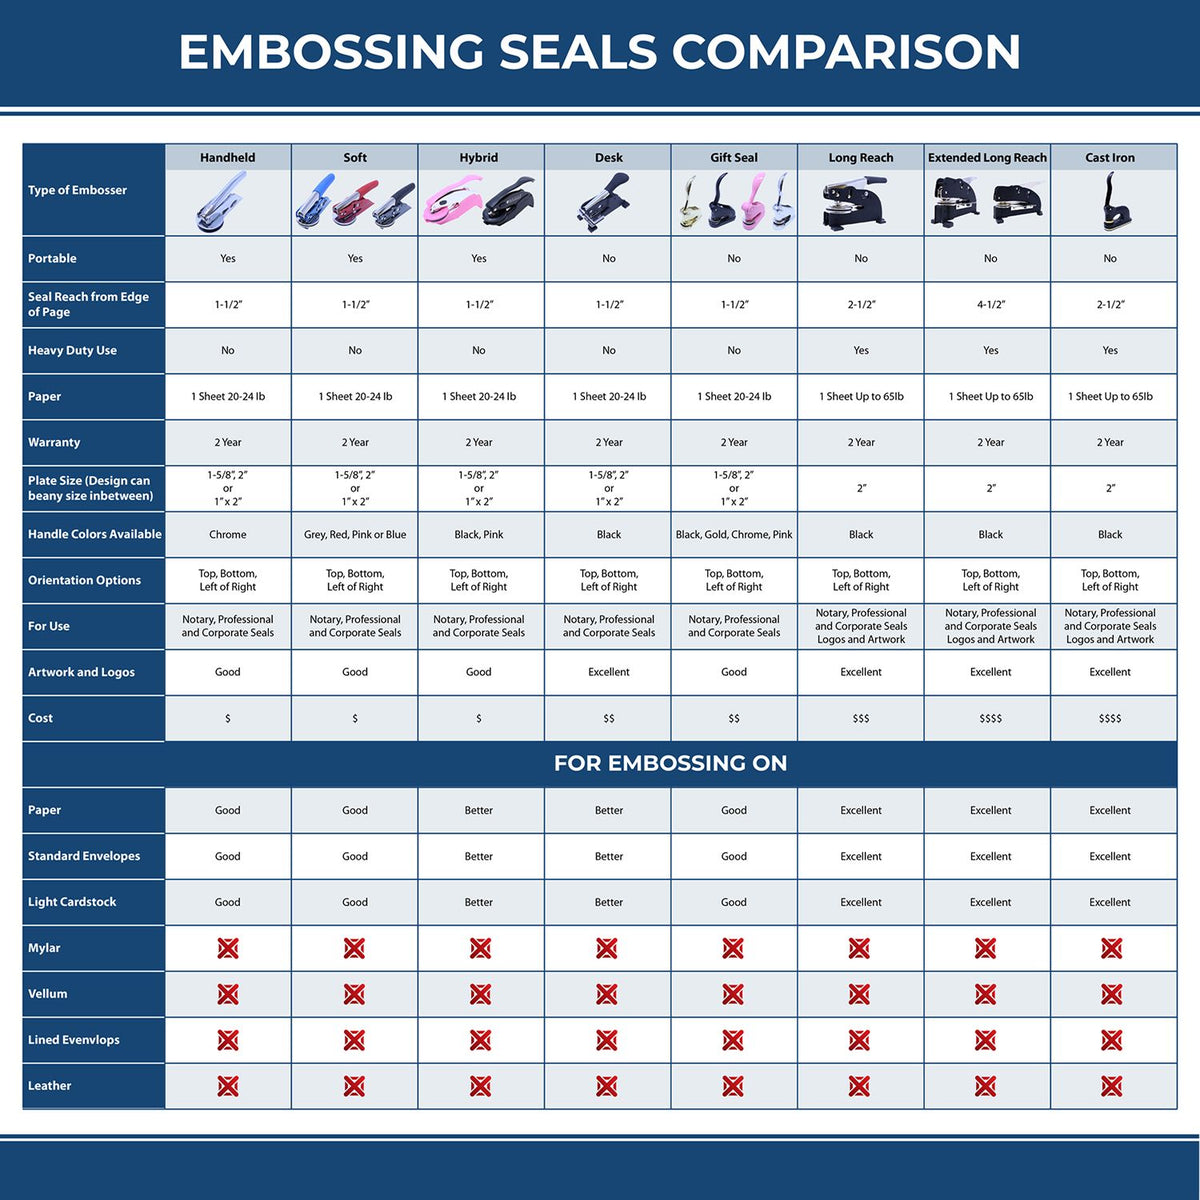 A comparison chart for the different types of mount models available for the Hybrid Wyoming Architect Seal